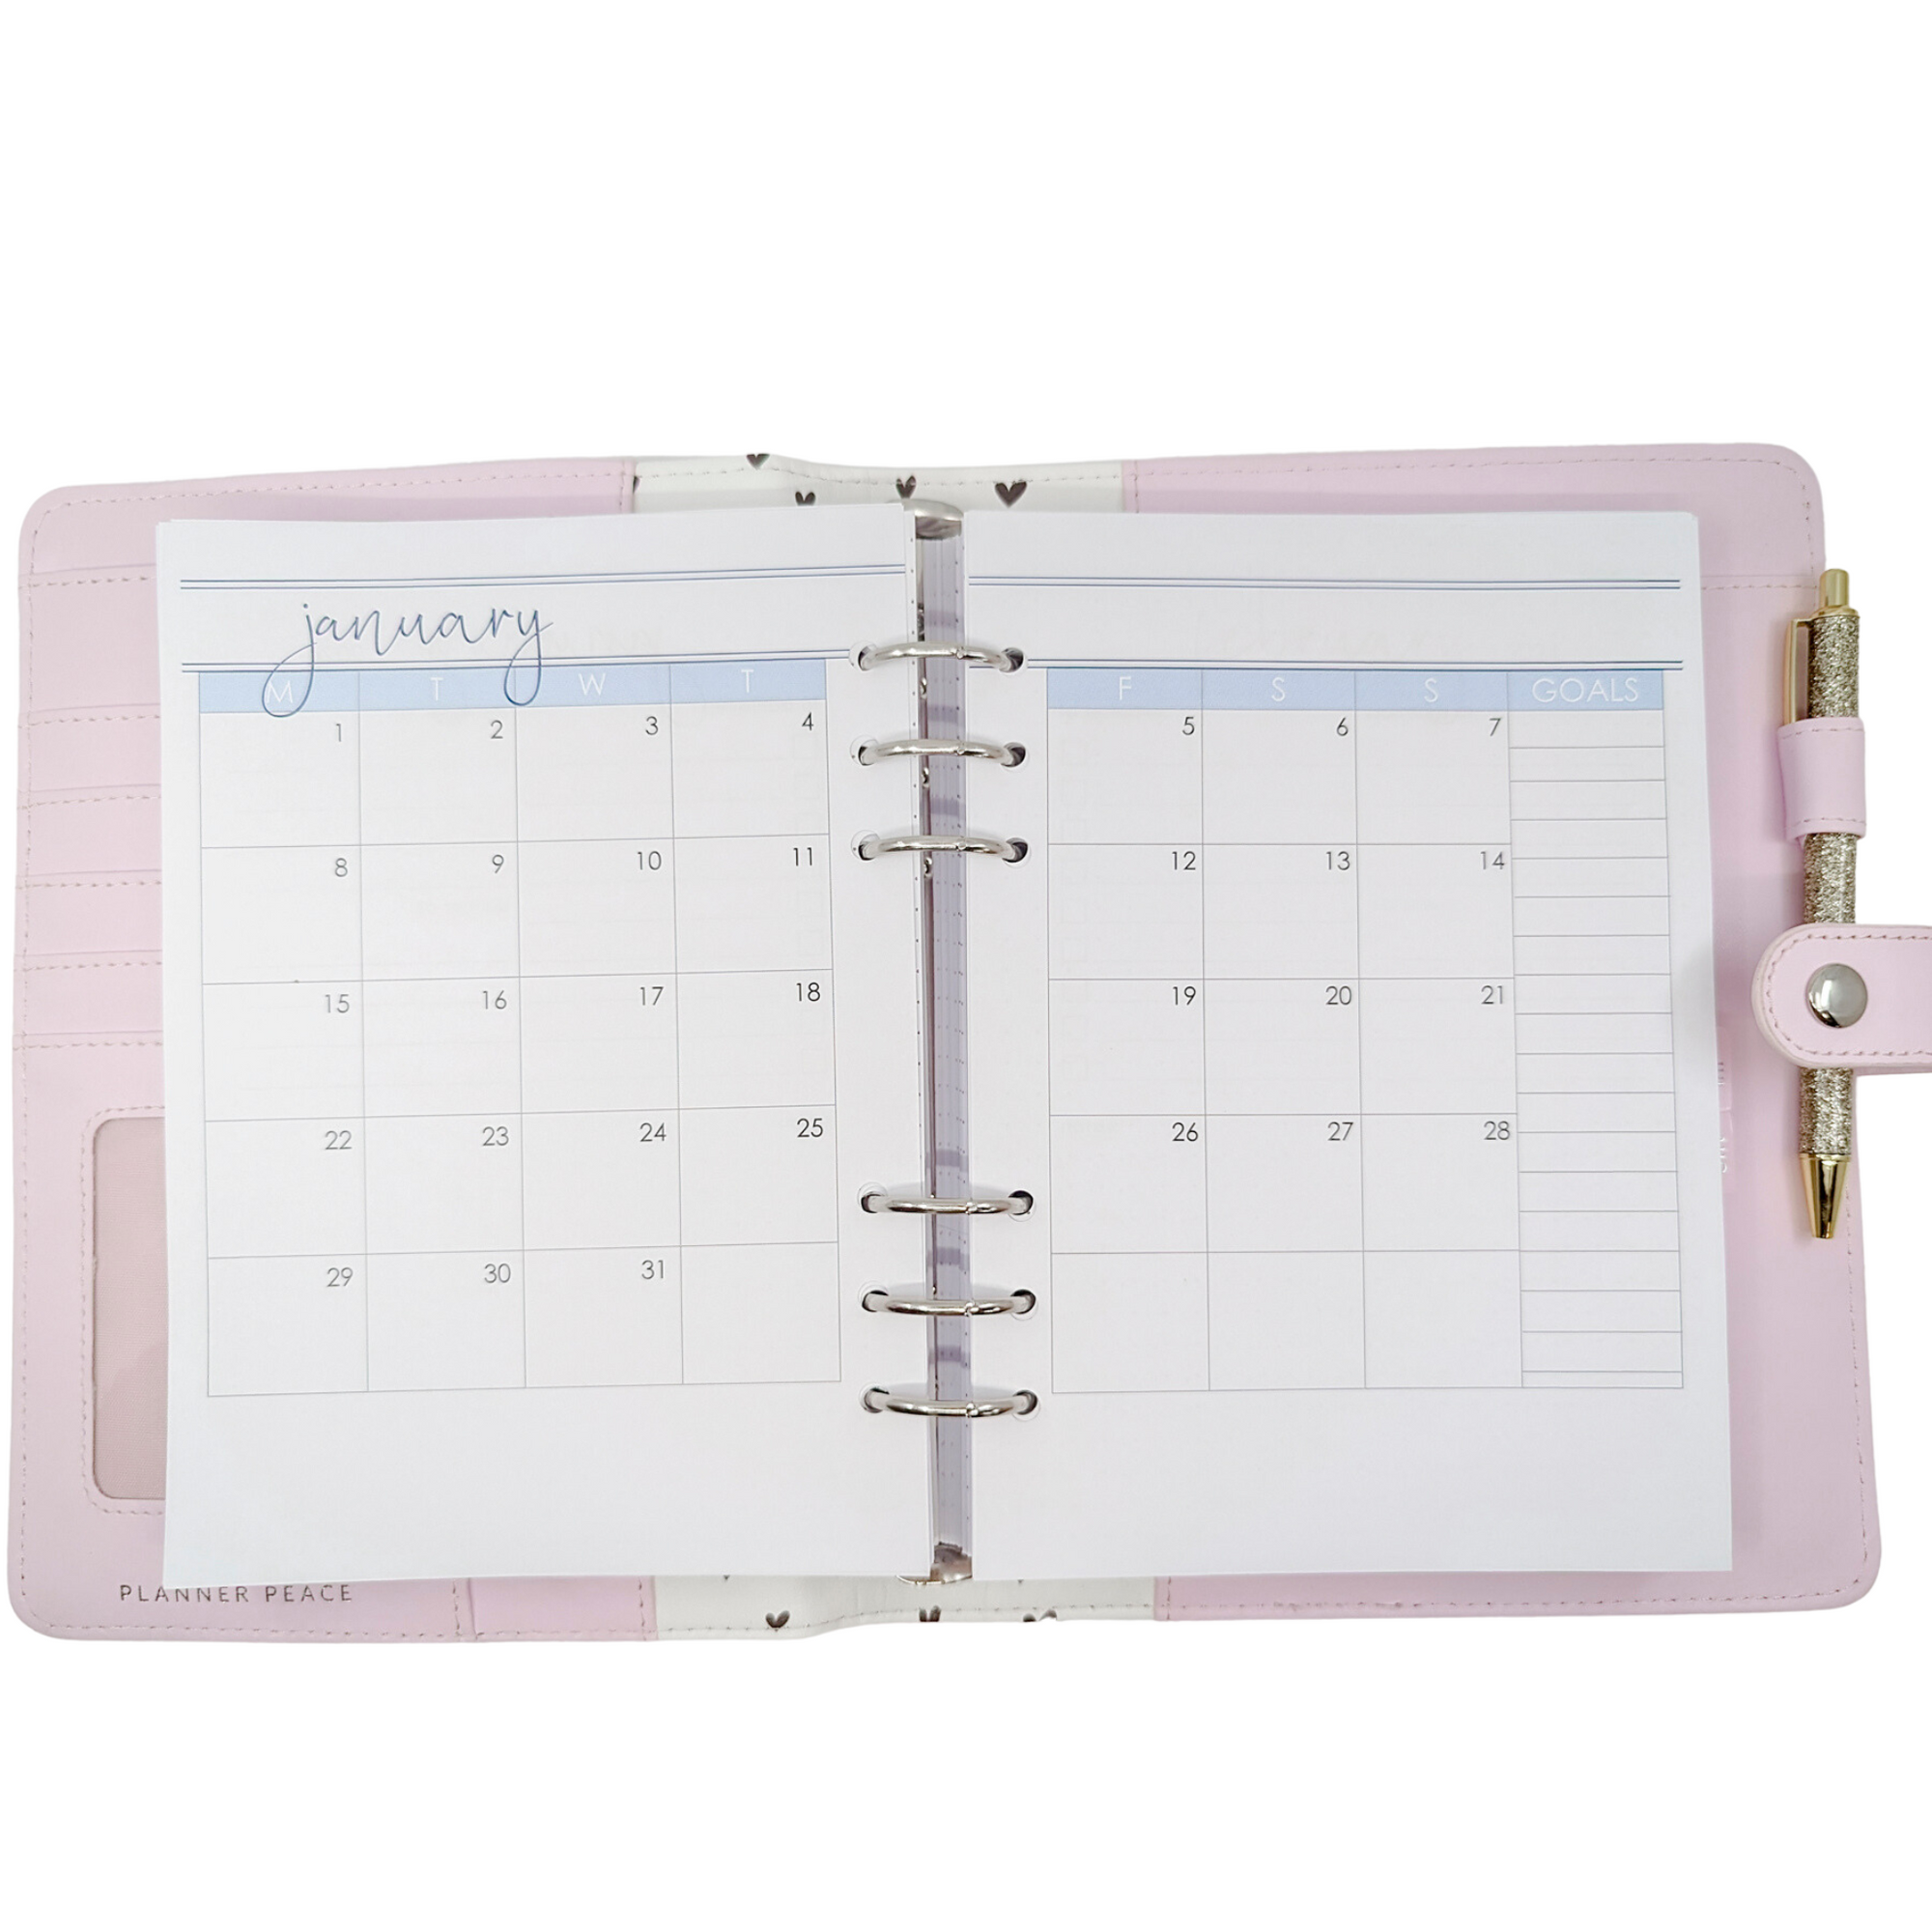 Monthly A5 planner refills for 6 ring planners